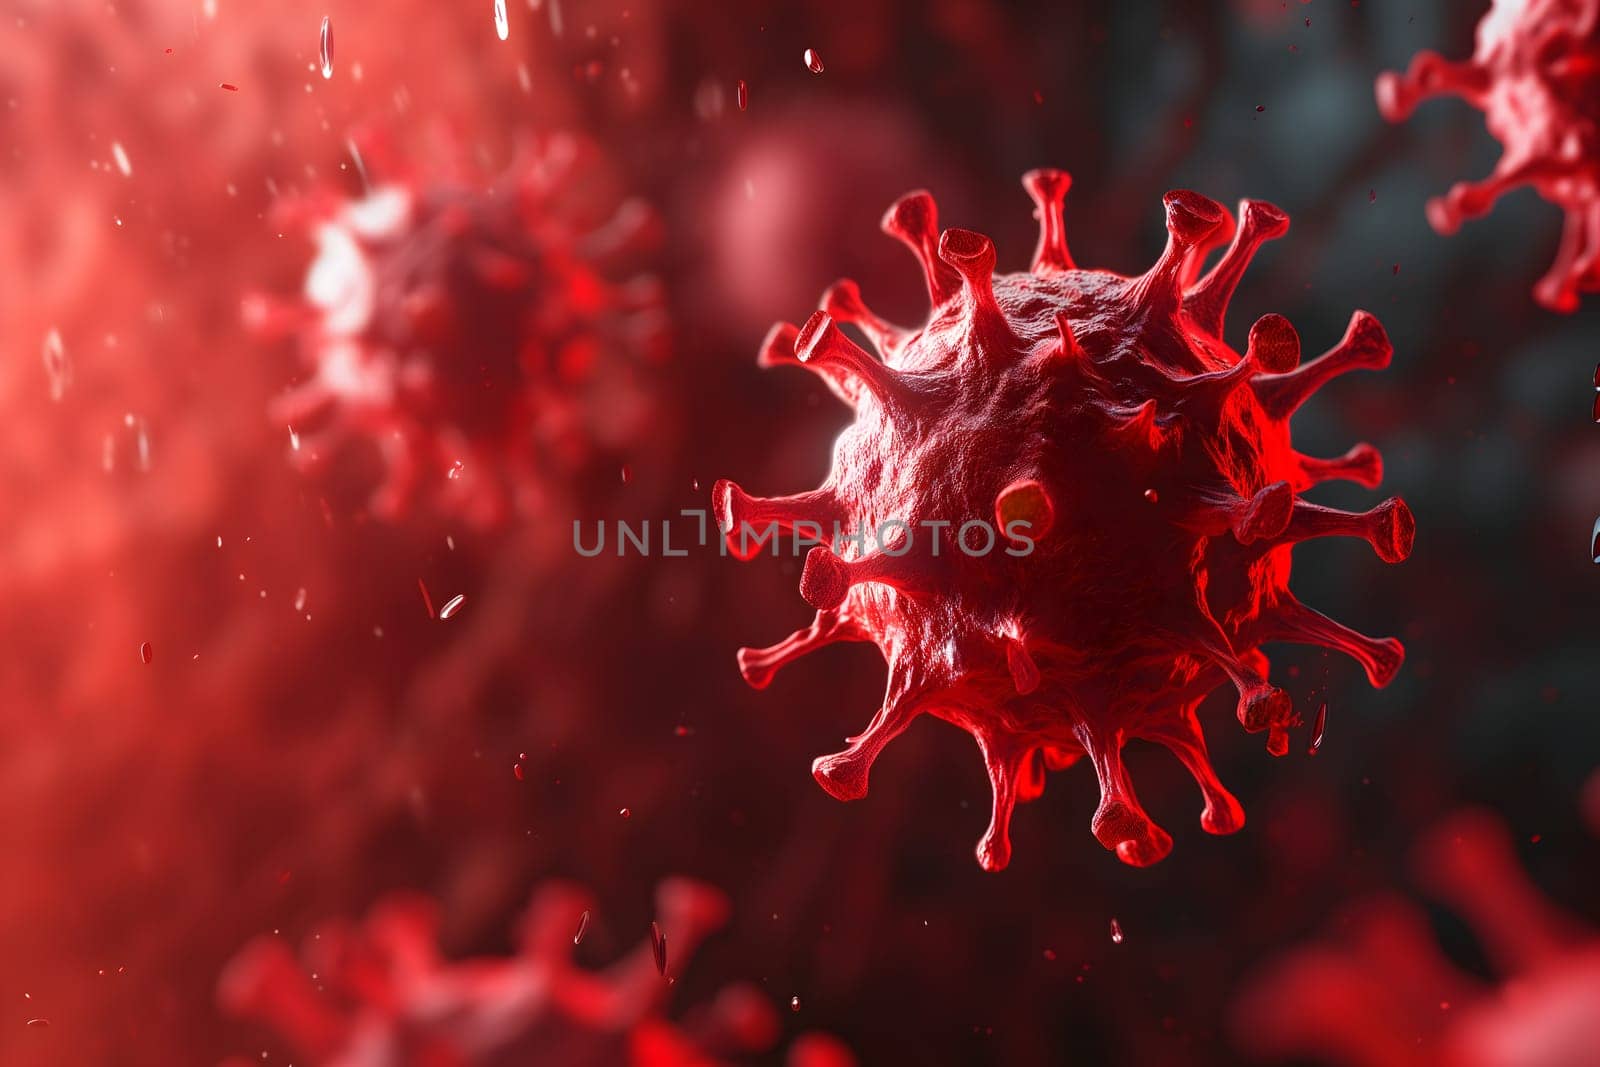 Red coronaviruses micro scene background. Neural network generated image. Not based on any actual scene or pattern.